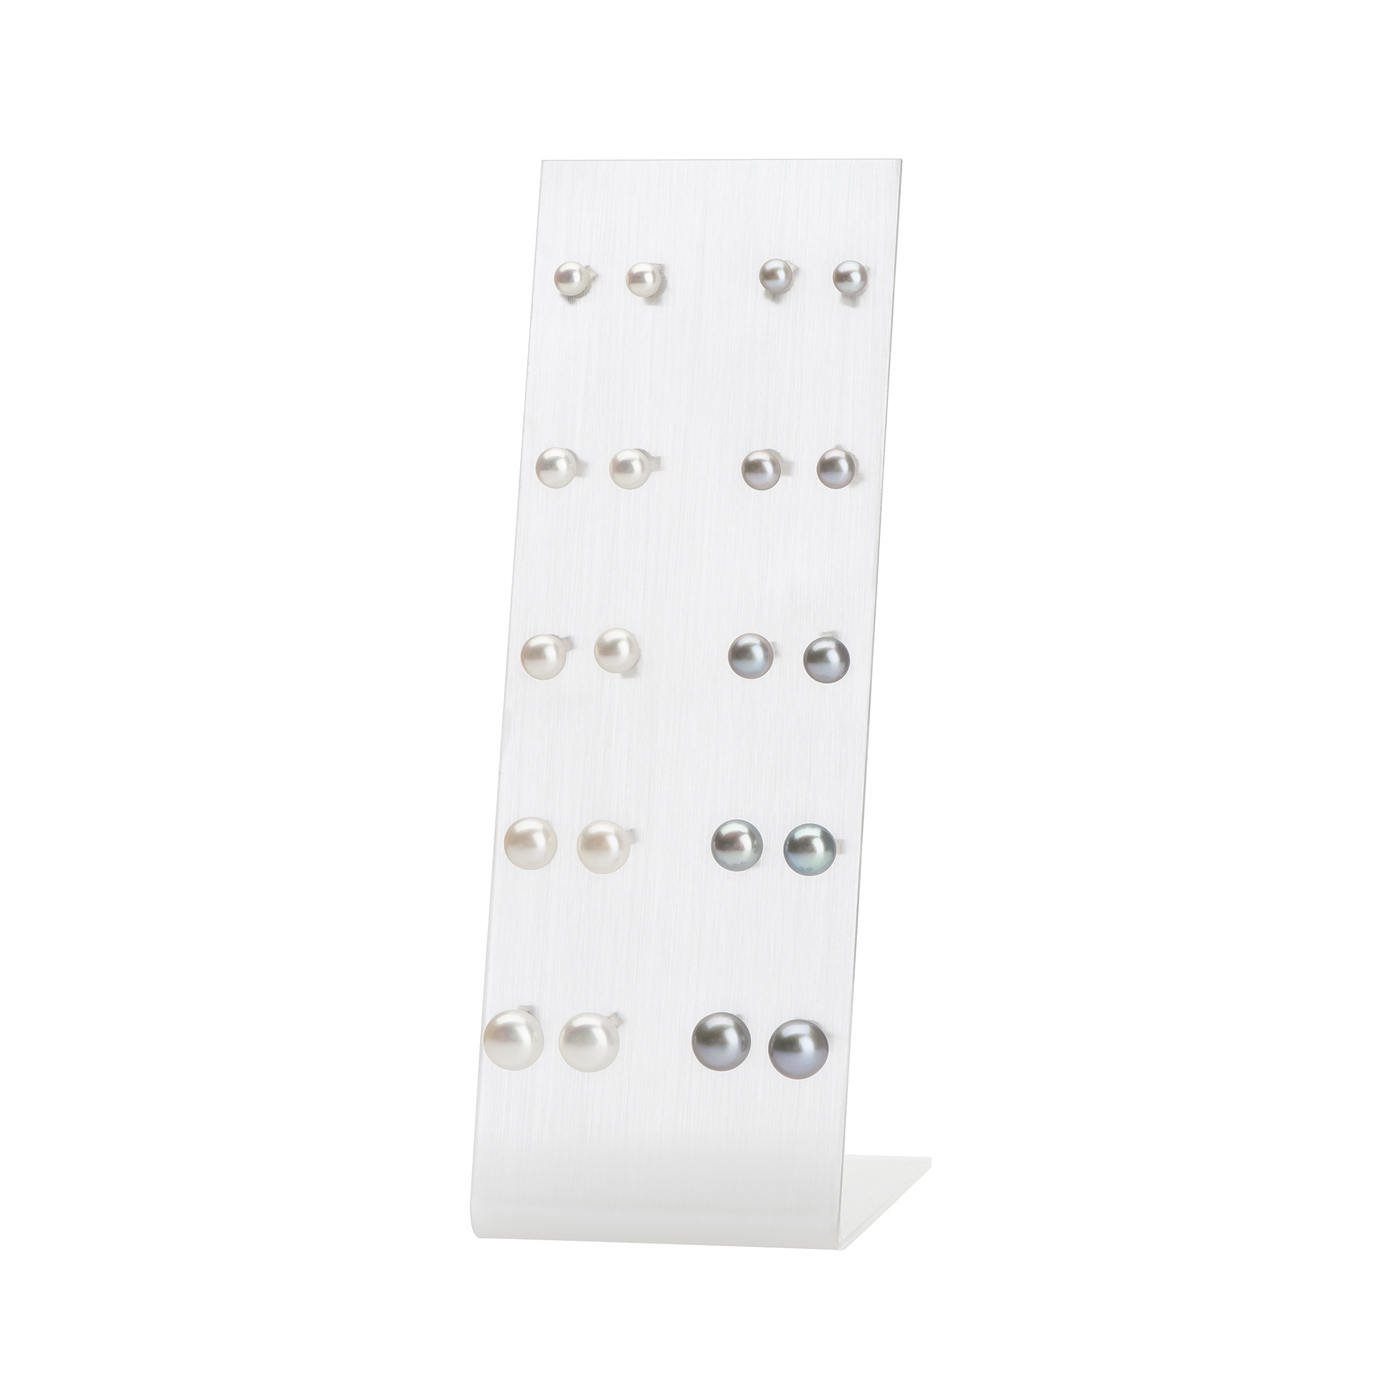 Pearl Ear Stud with Display, White/Silver - 1 assortment